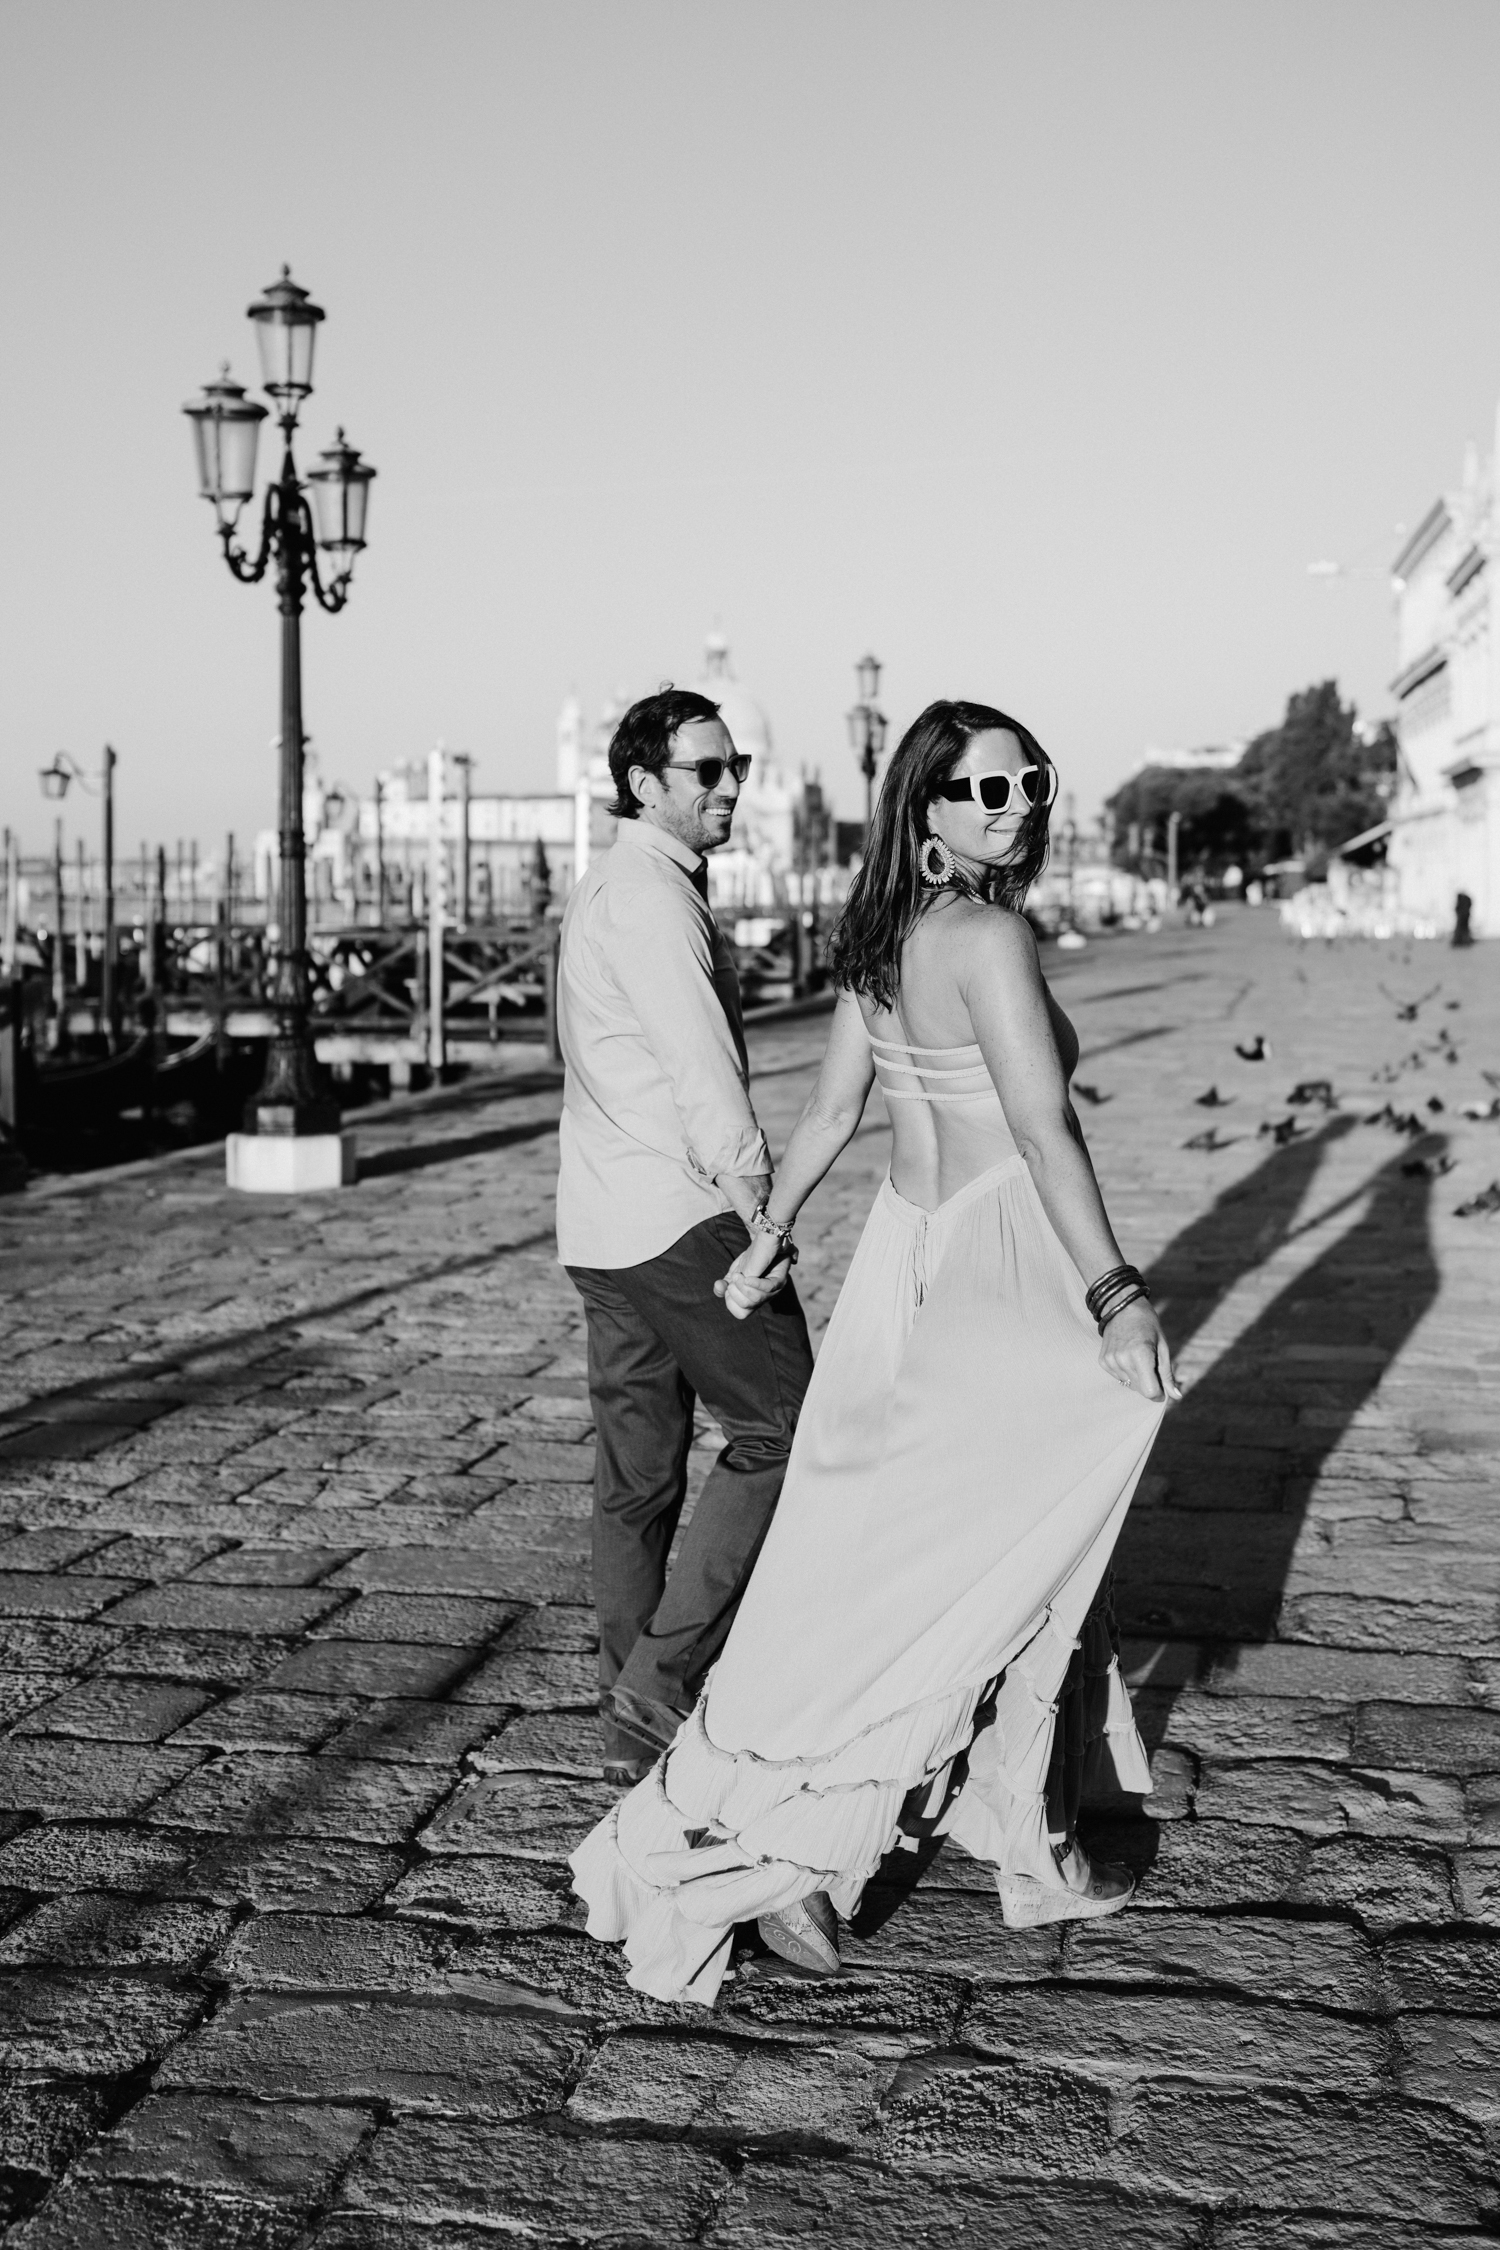 Book your Venice photographer  - Alina Indi - for your romantic couples photoshoot in Italy